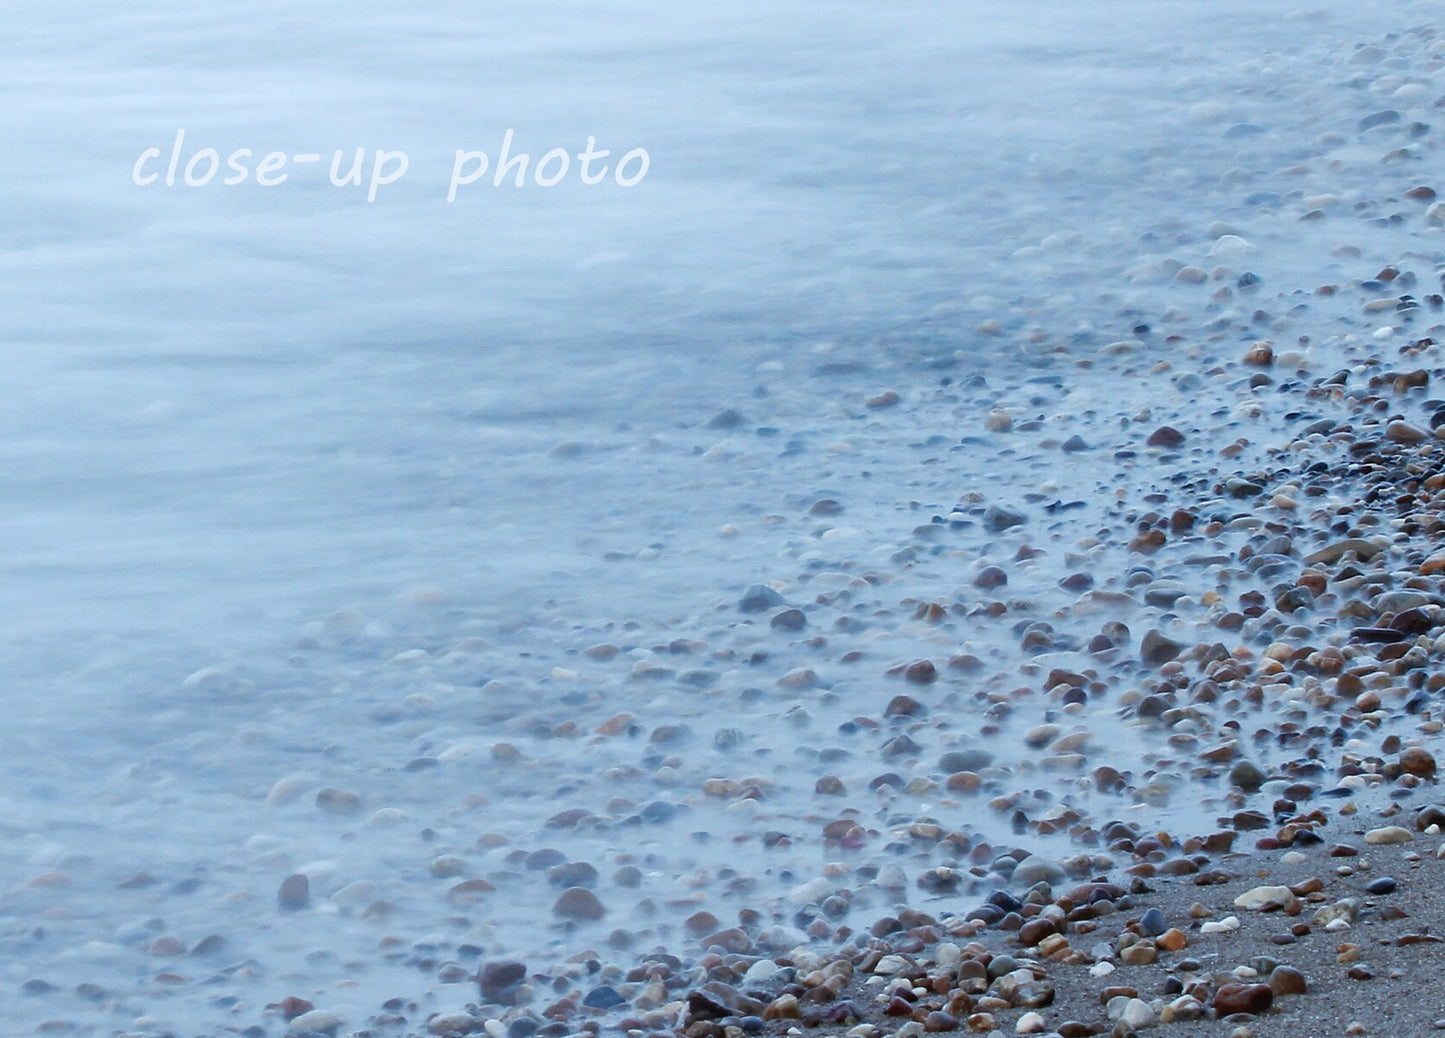 Pebbles art photo print, beach photography, blue silky water, Lake Michigan pictures, large paper or canvas wall decor, 5x7 8x10 to 24x36"